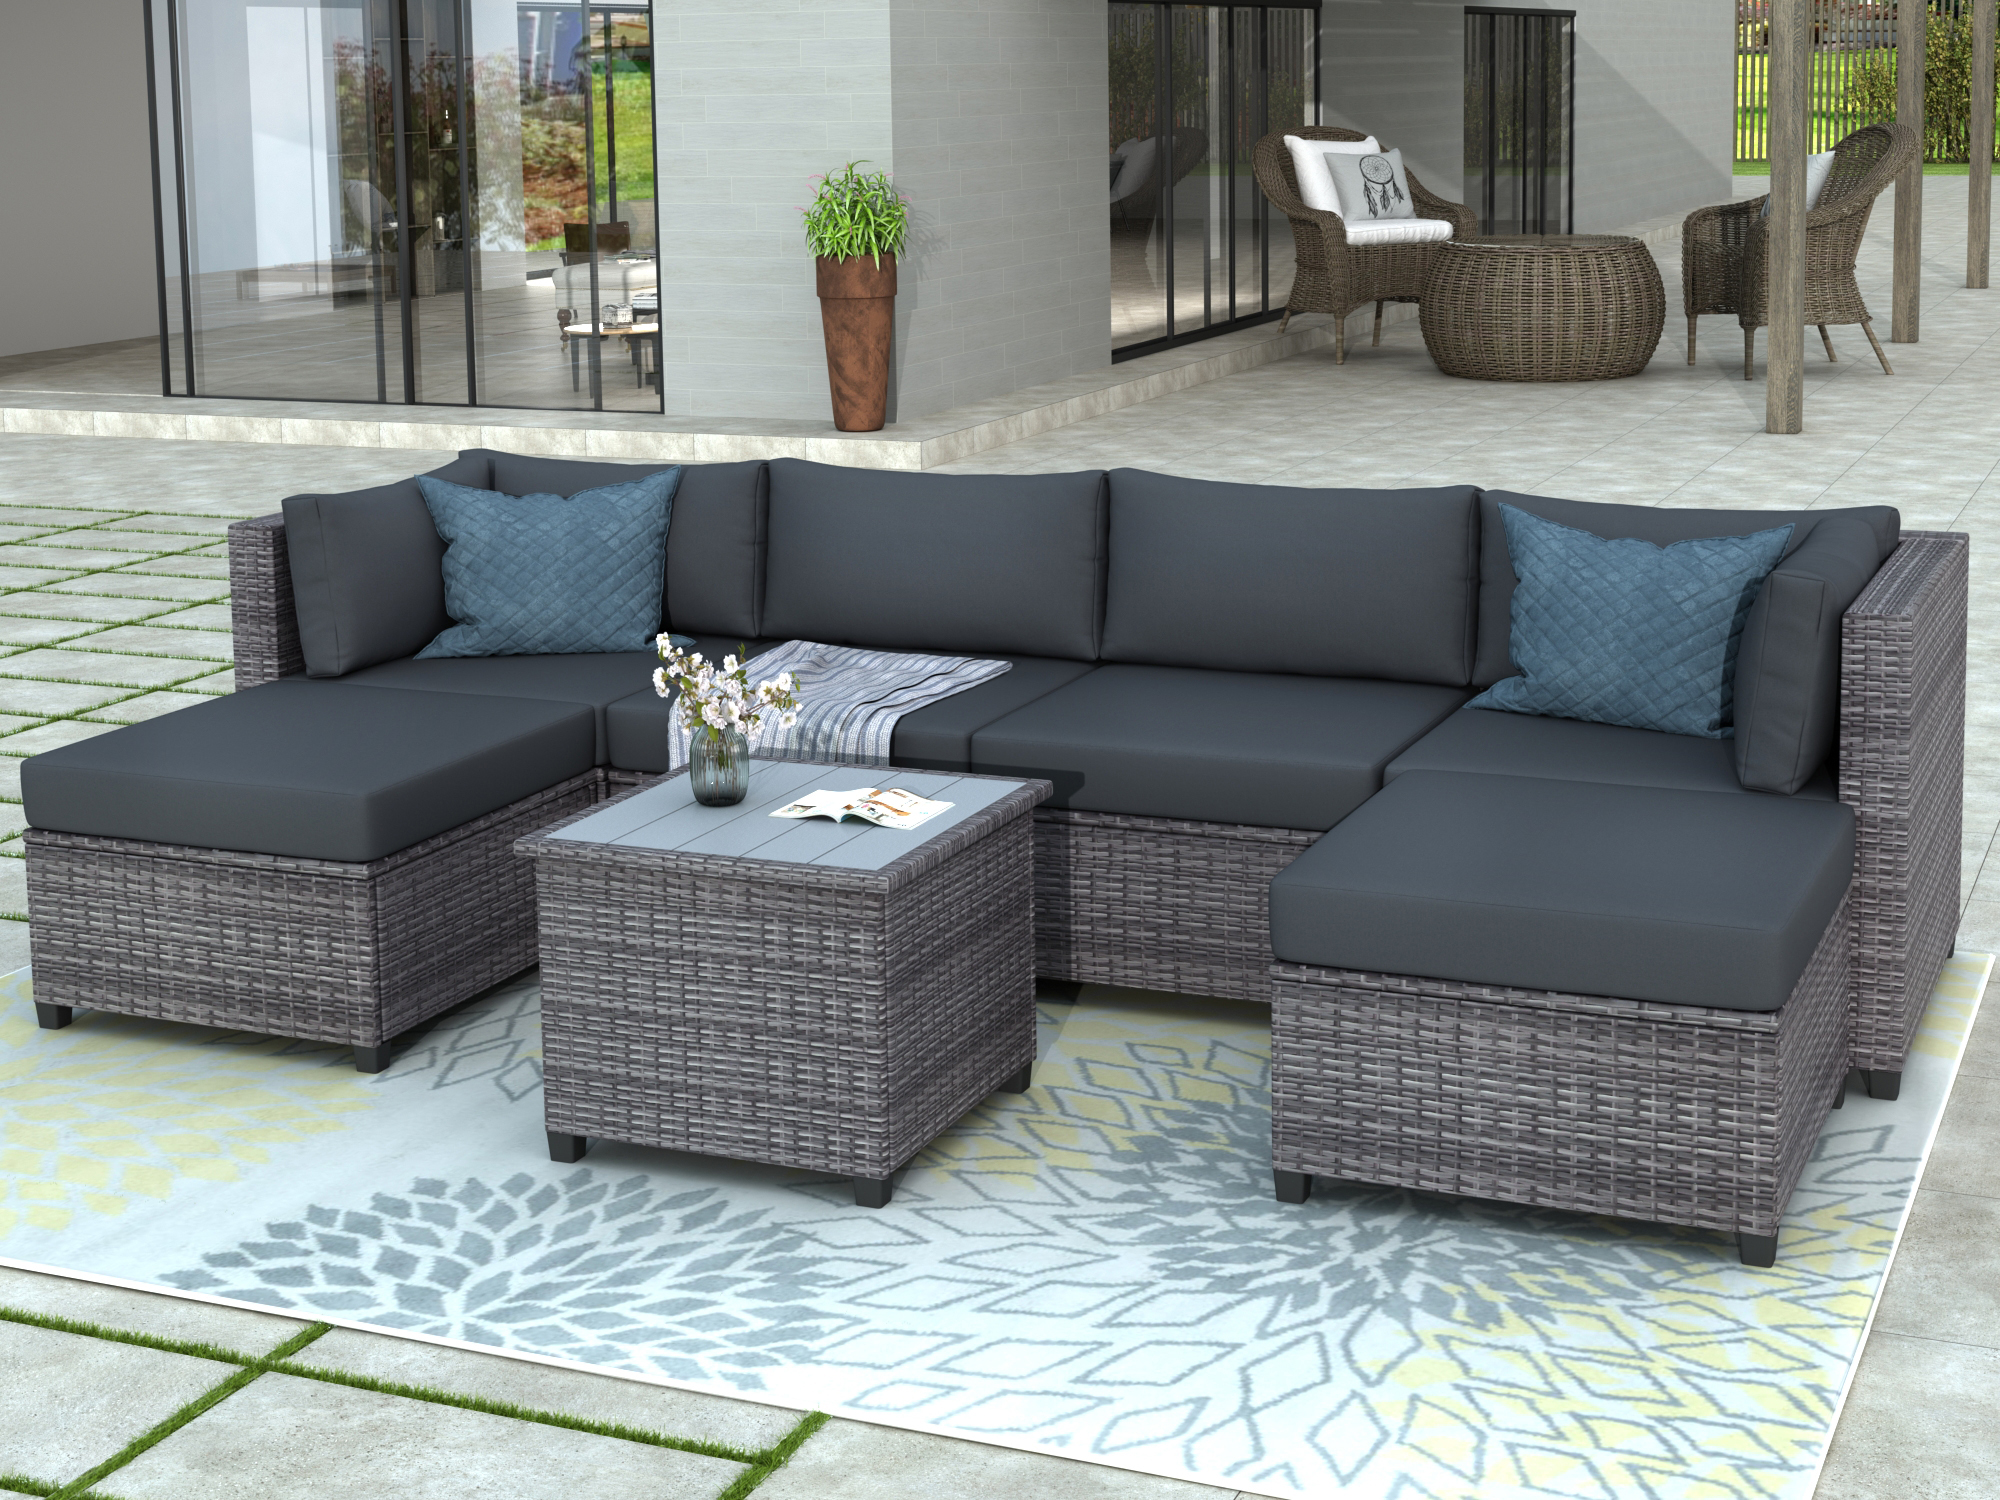 Outdoor Conversation Sets, 7 Piece Patio Furniture Sets with 4 PE Wicker Sofas, 2 Ottoman, Coffee Table, All-Weather Patio Sectional Sofa Set with Gray Cushions for Backyard Porch Garden Pool, LLL33 - image 1 of 8